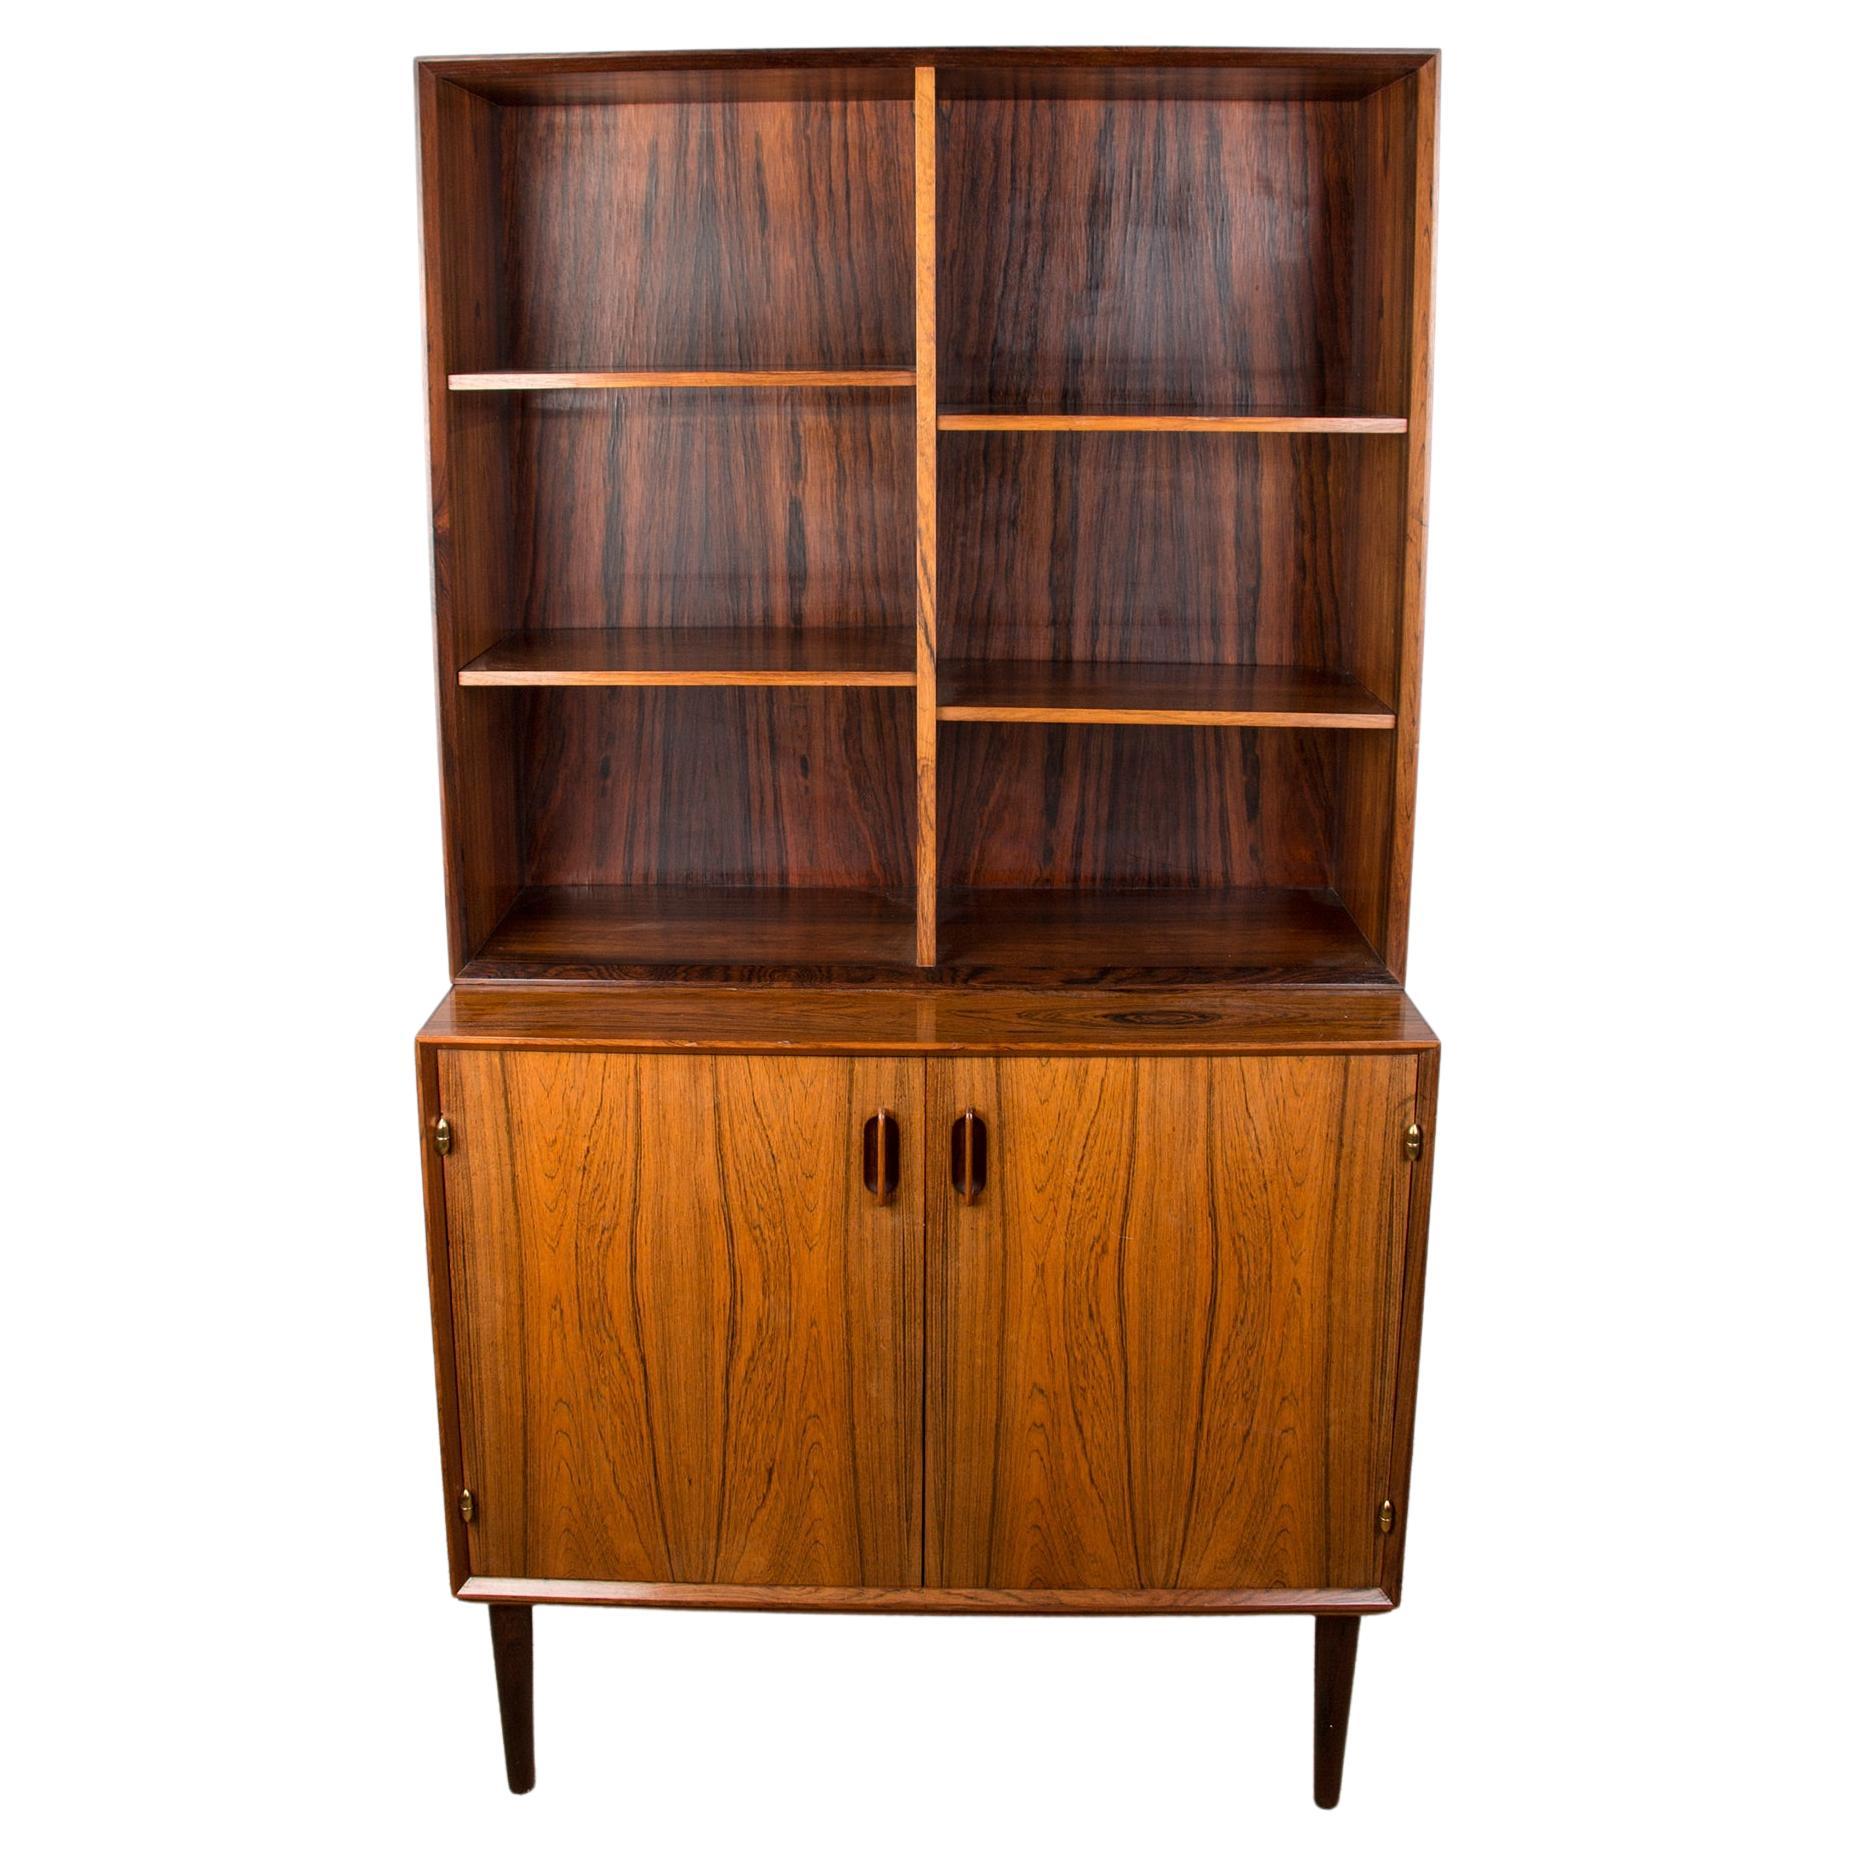 Danish Rosewood Bookcase by Ejvind a Johansson for Ivan Gern, 1960